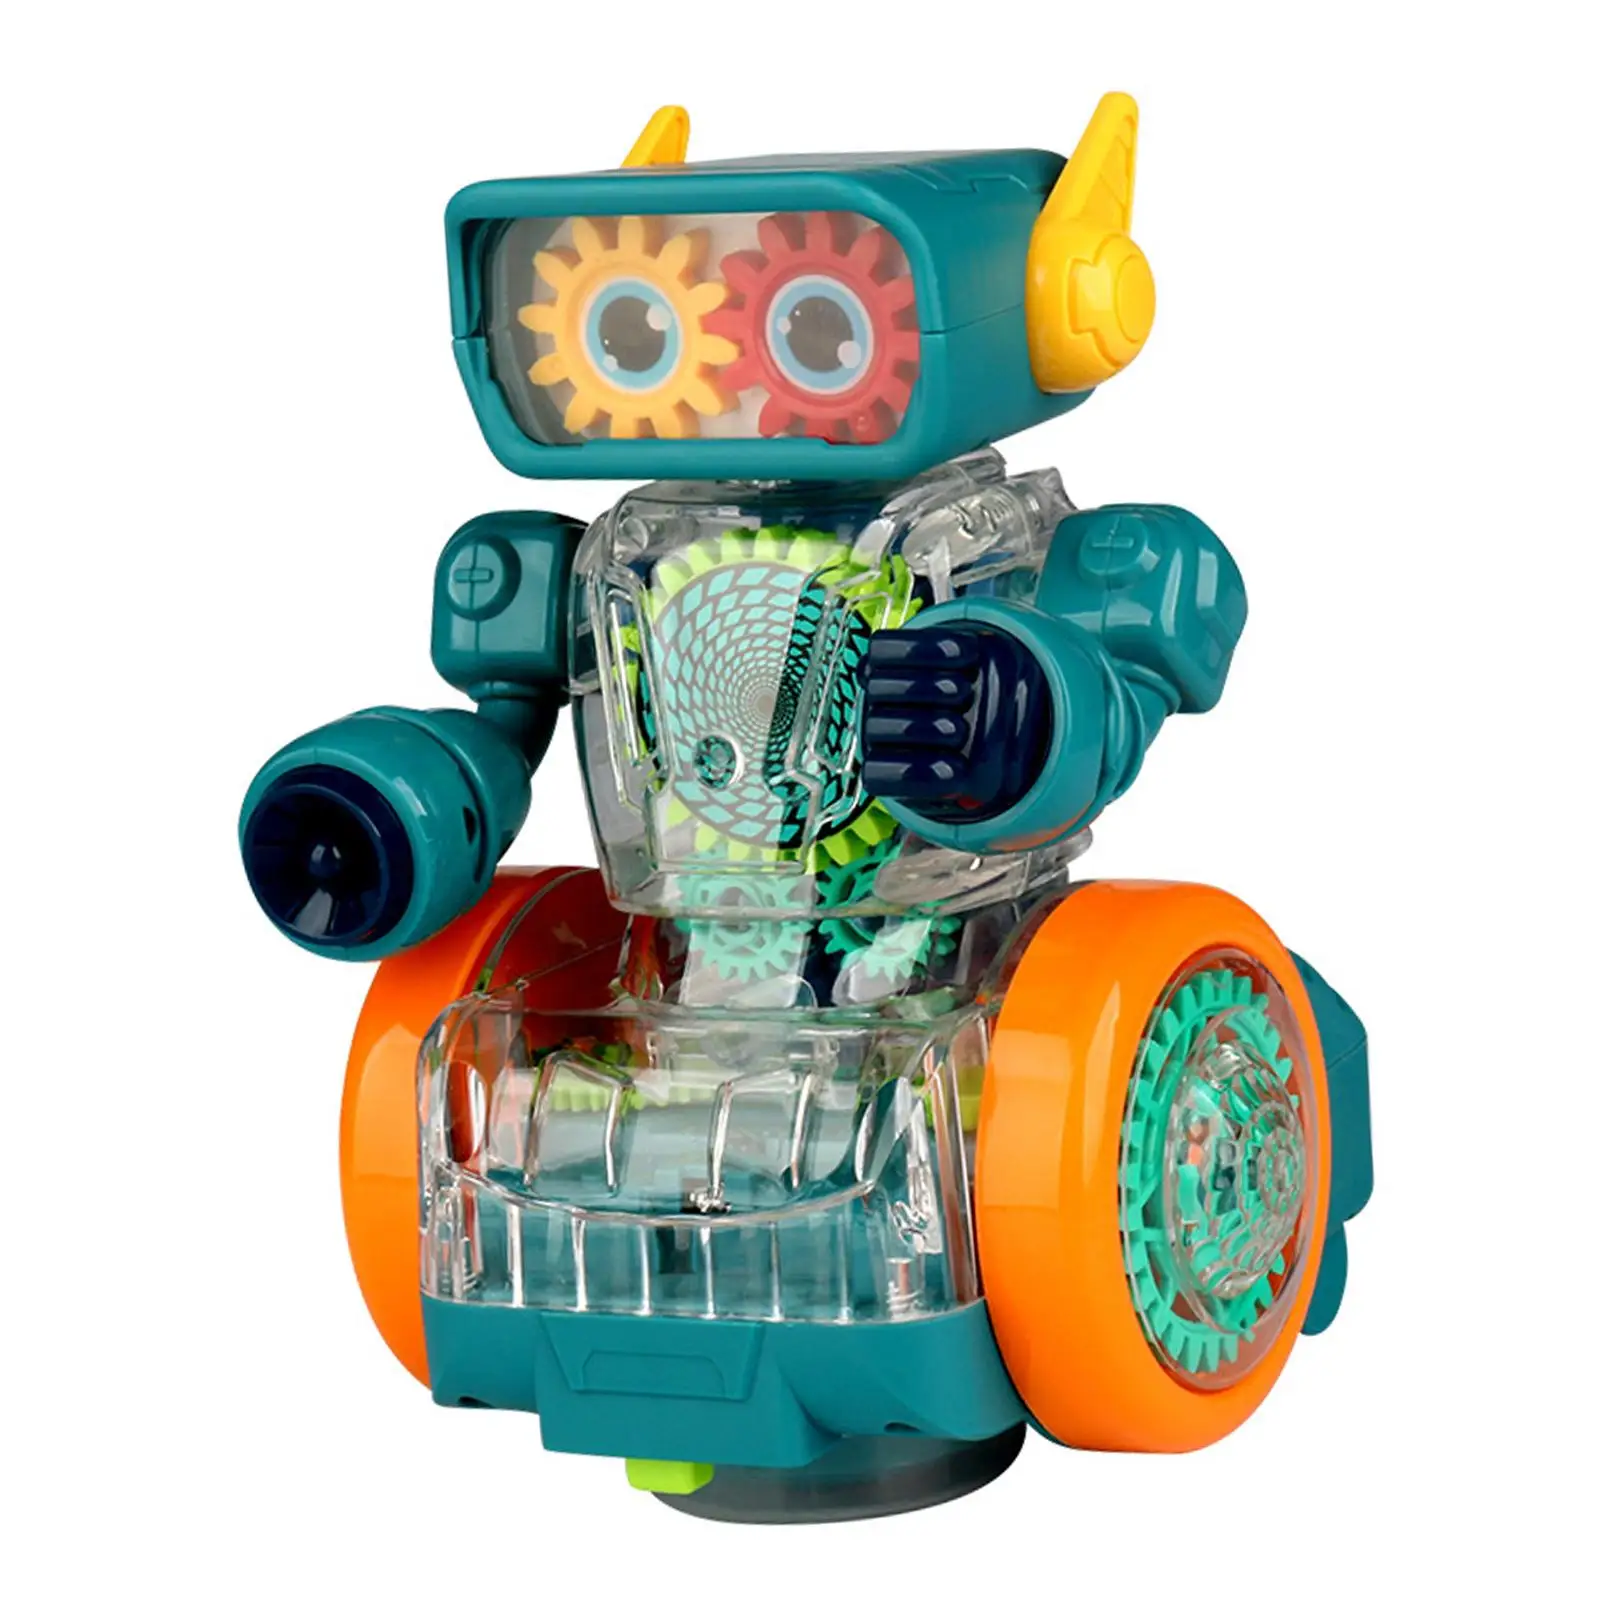 Mechanical Gear Robot Toy with Moving Gears with Music for Toddlers Children